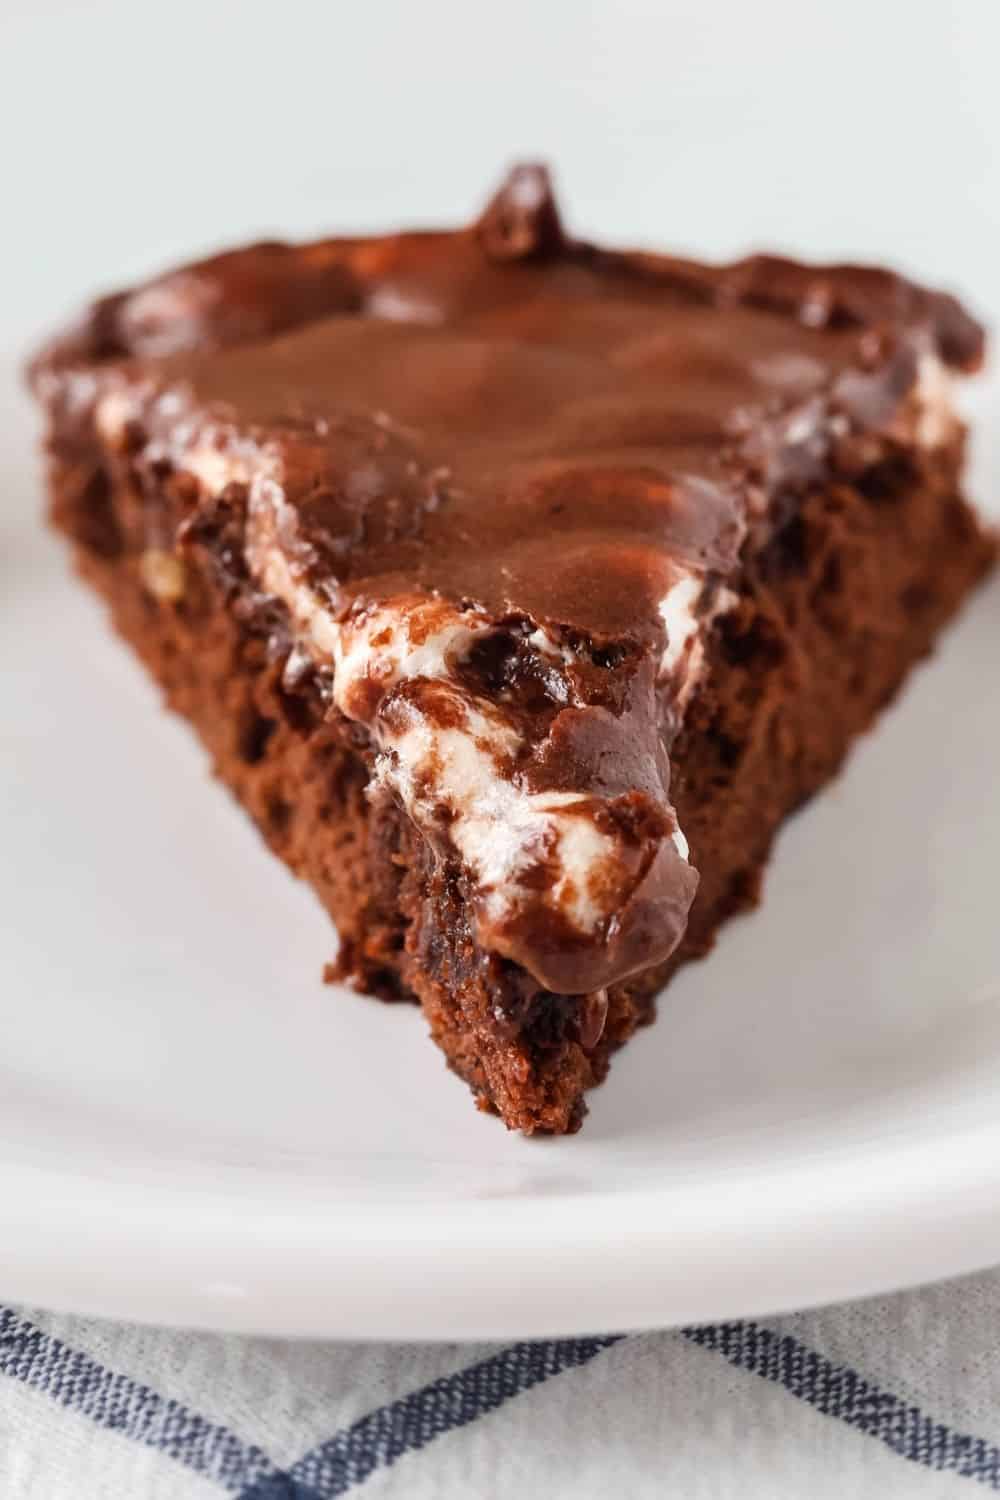 close-up view of a wedge slice of appalachian brownie fudge pie, showing melted marshmallows and chocolate icing over the brownie layer.